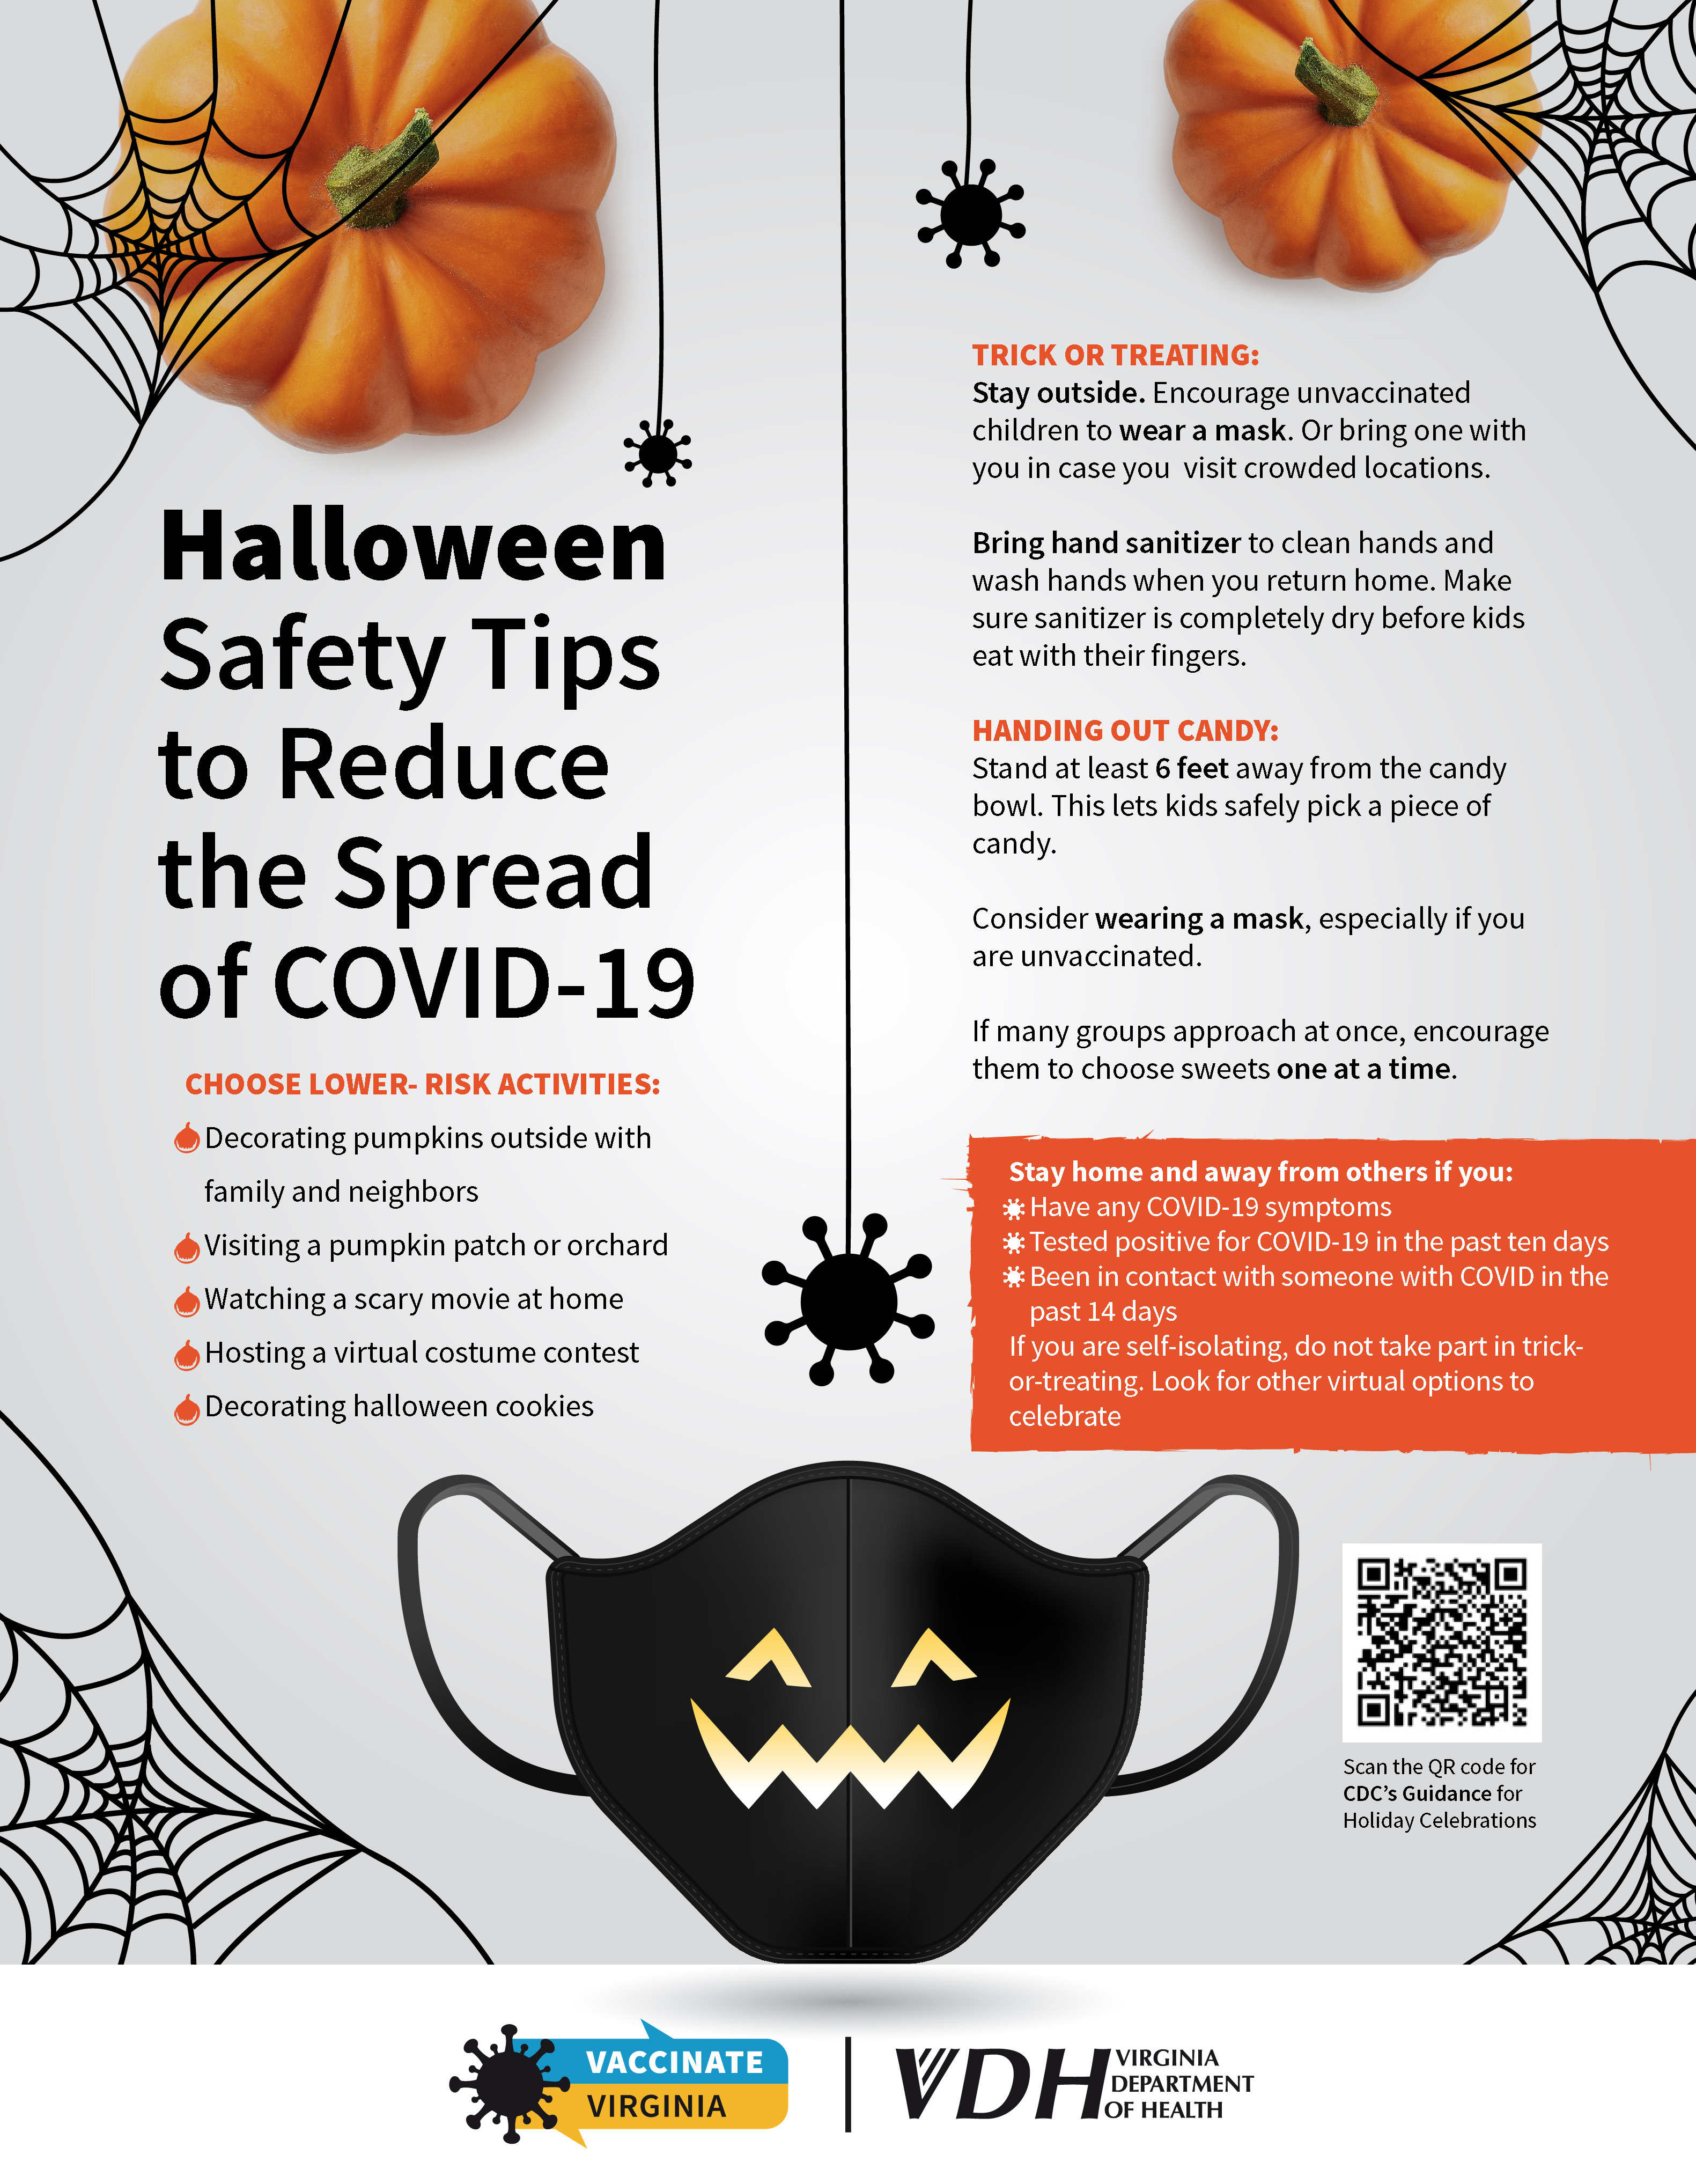 the image is a one-page handout highlighting the VDH's tips on celebrating halloween safely